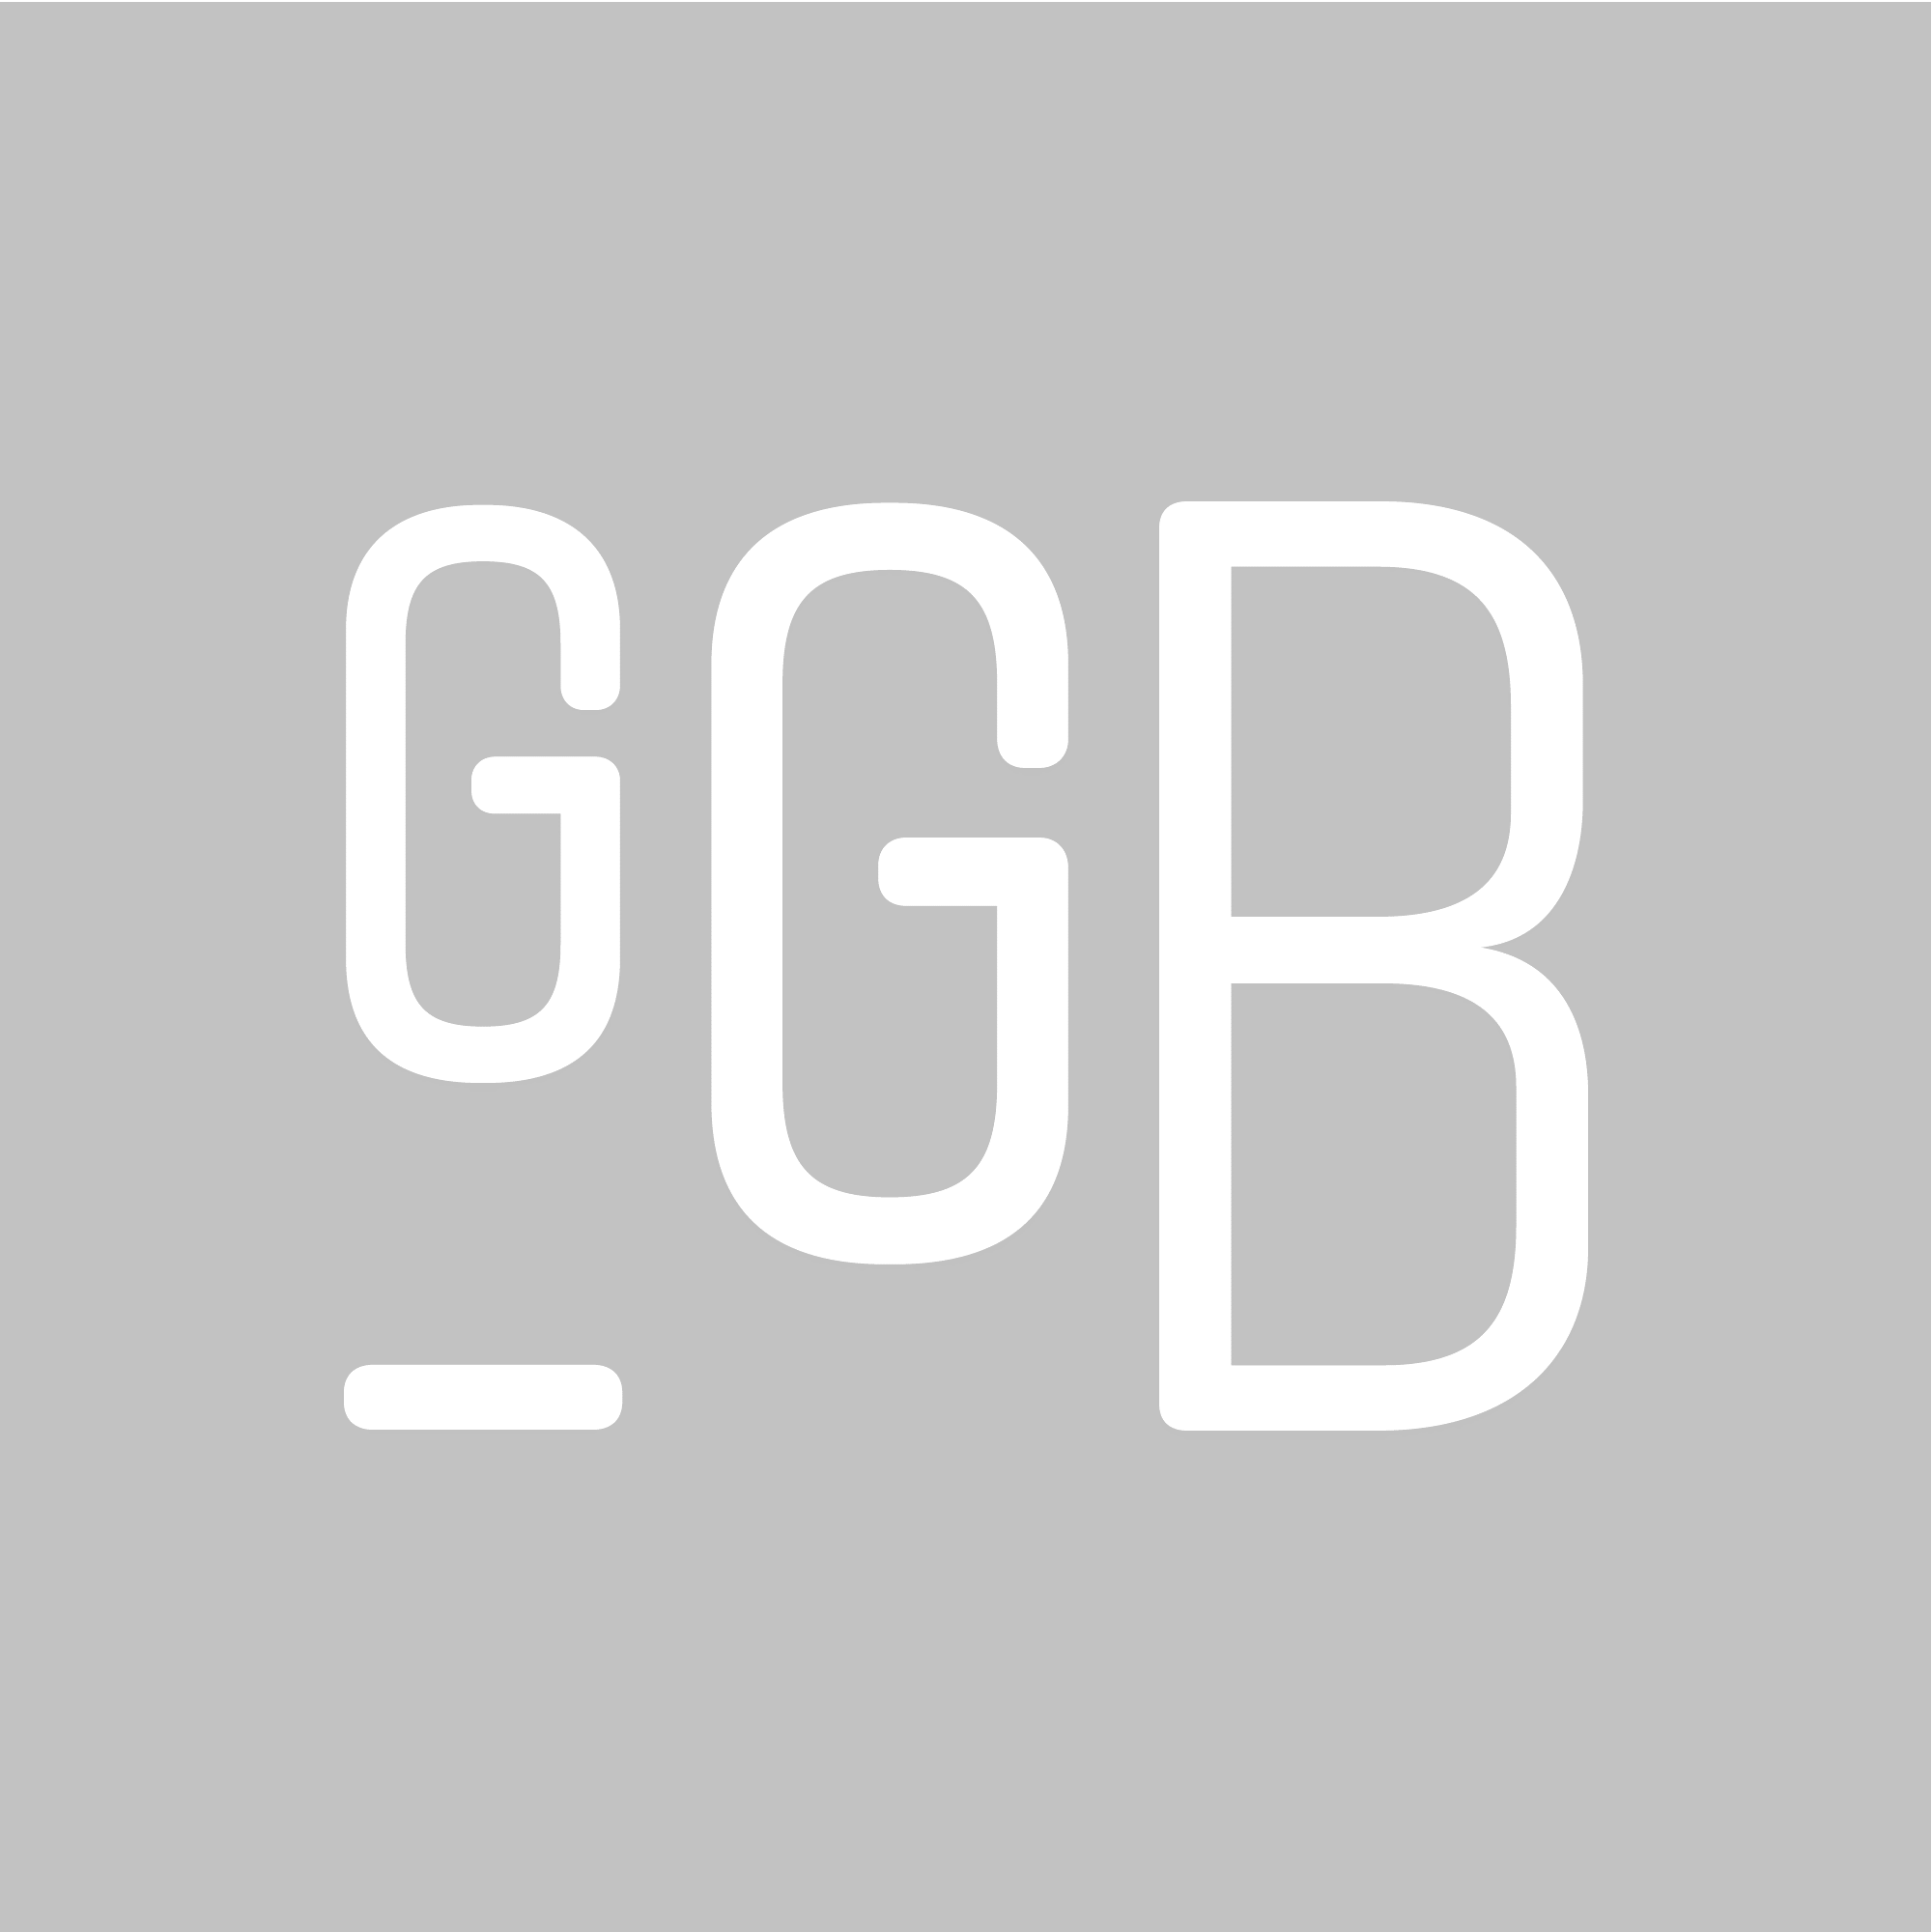 GGB black and white logo.png